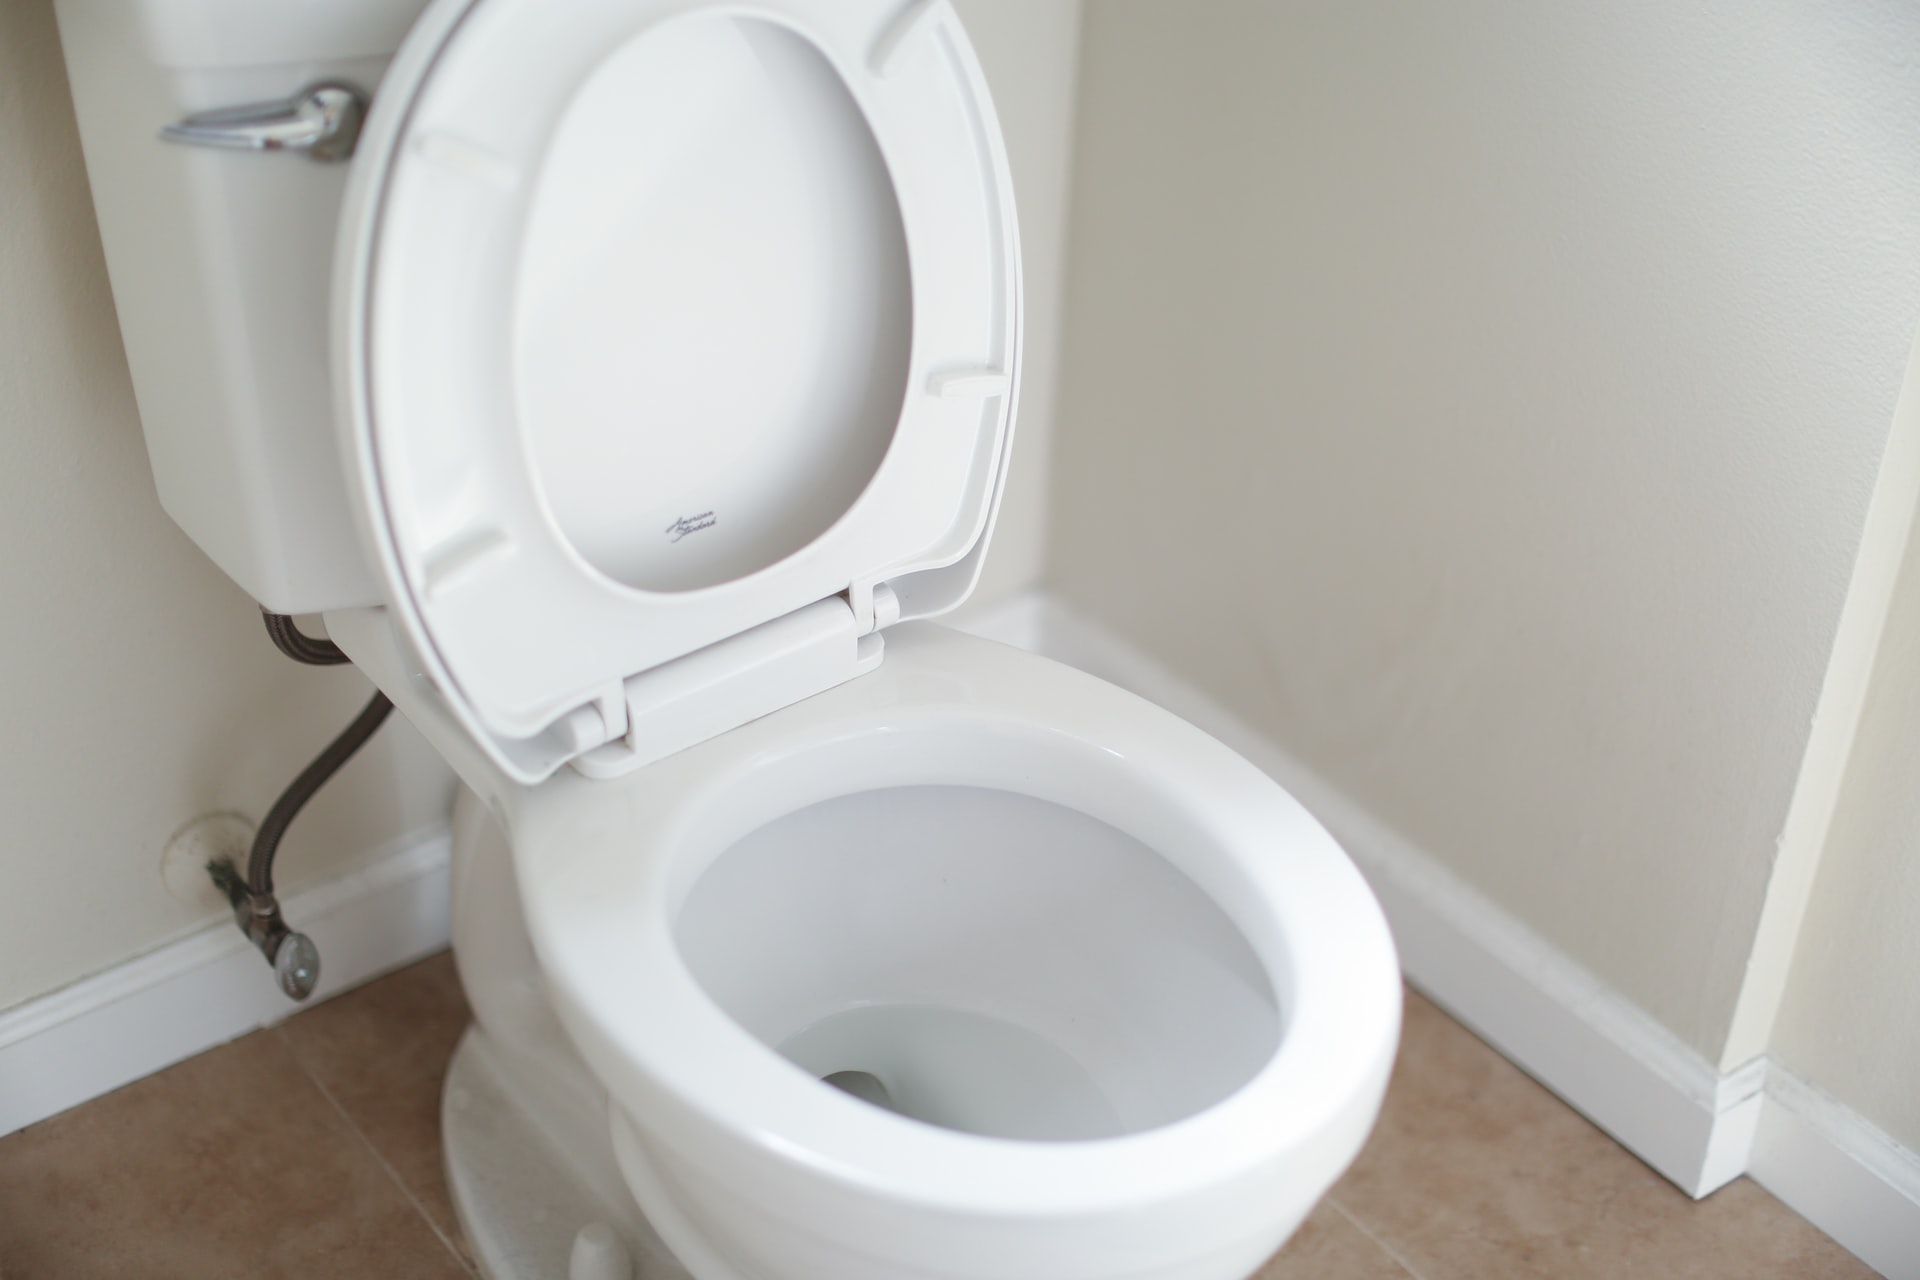 Toilet Seat Cover Manufacturers